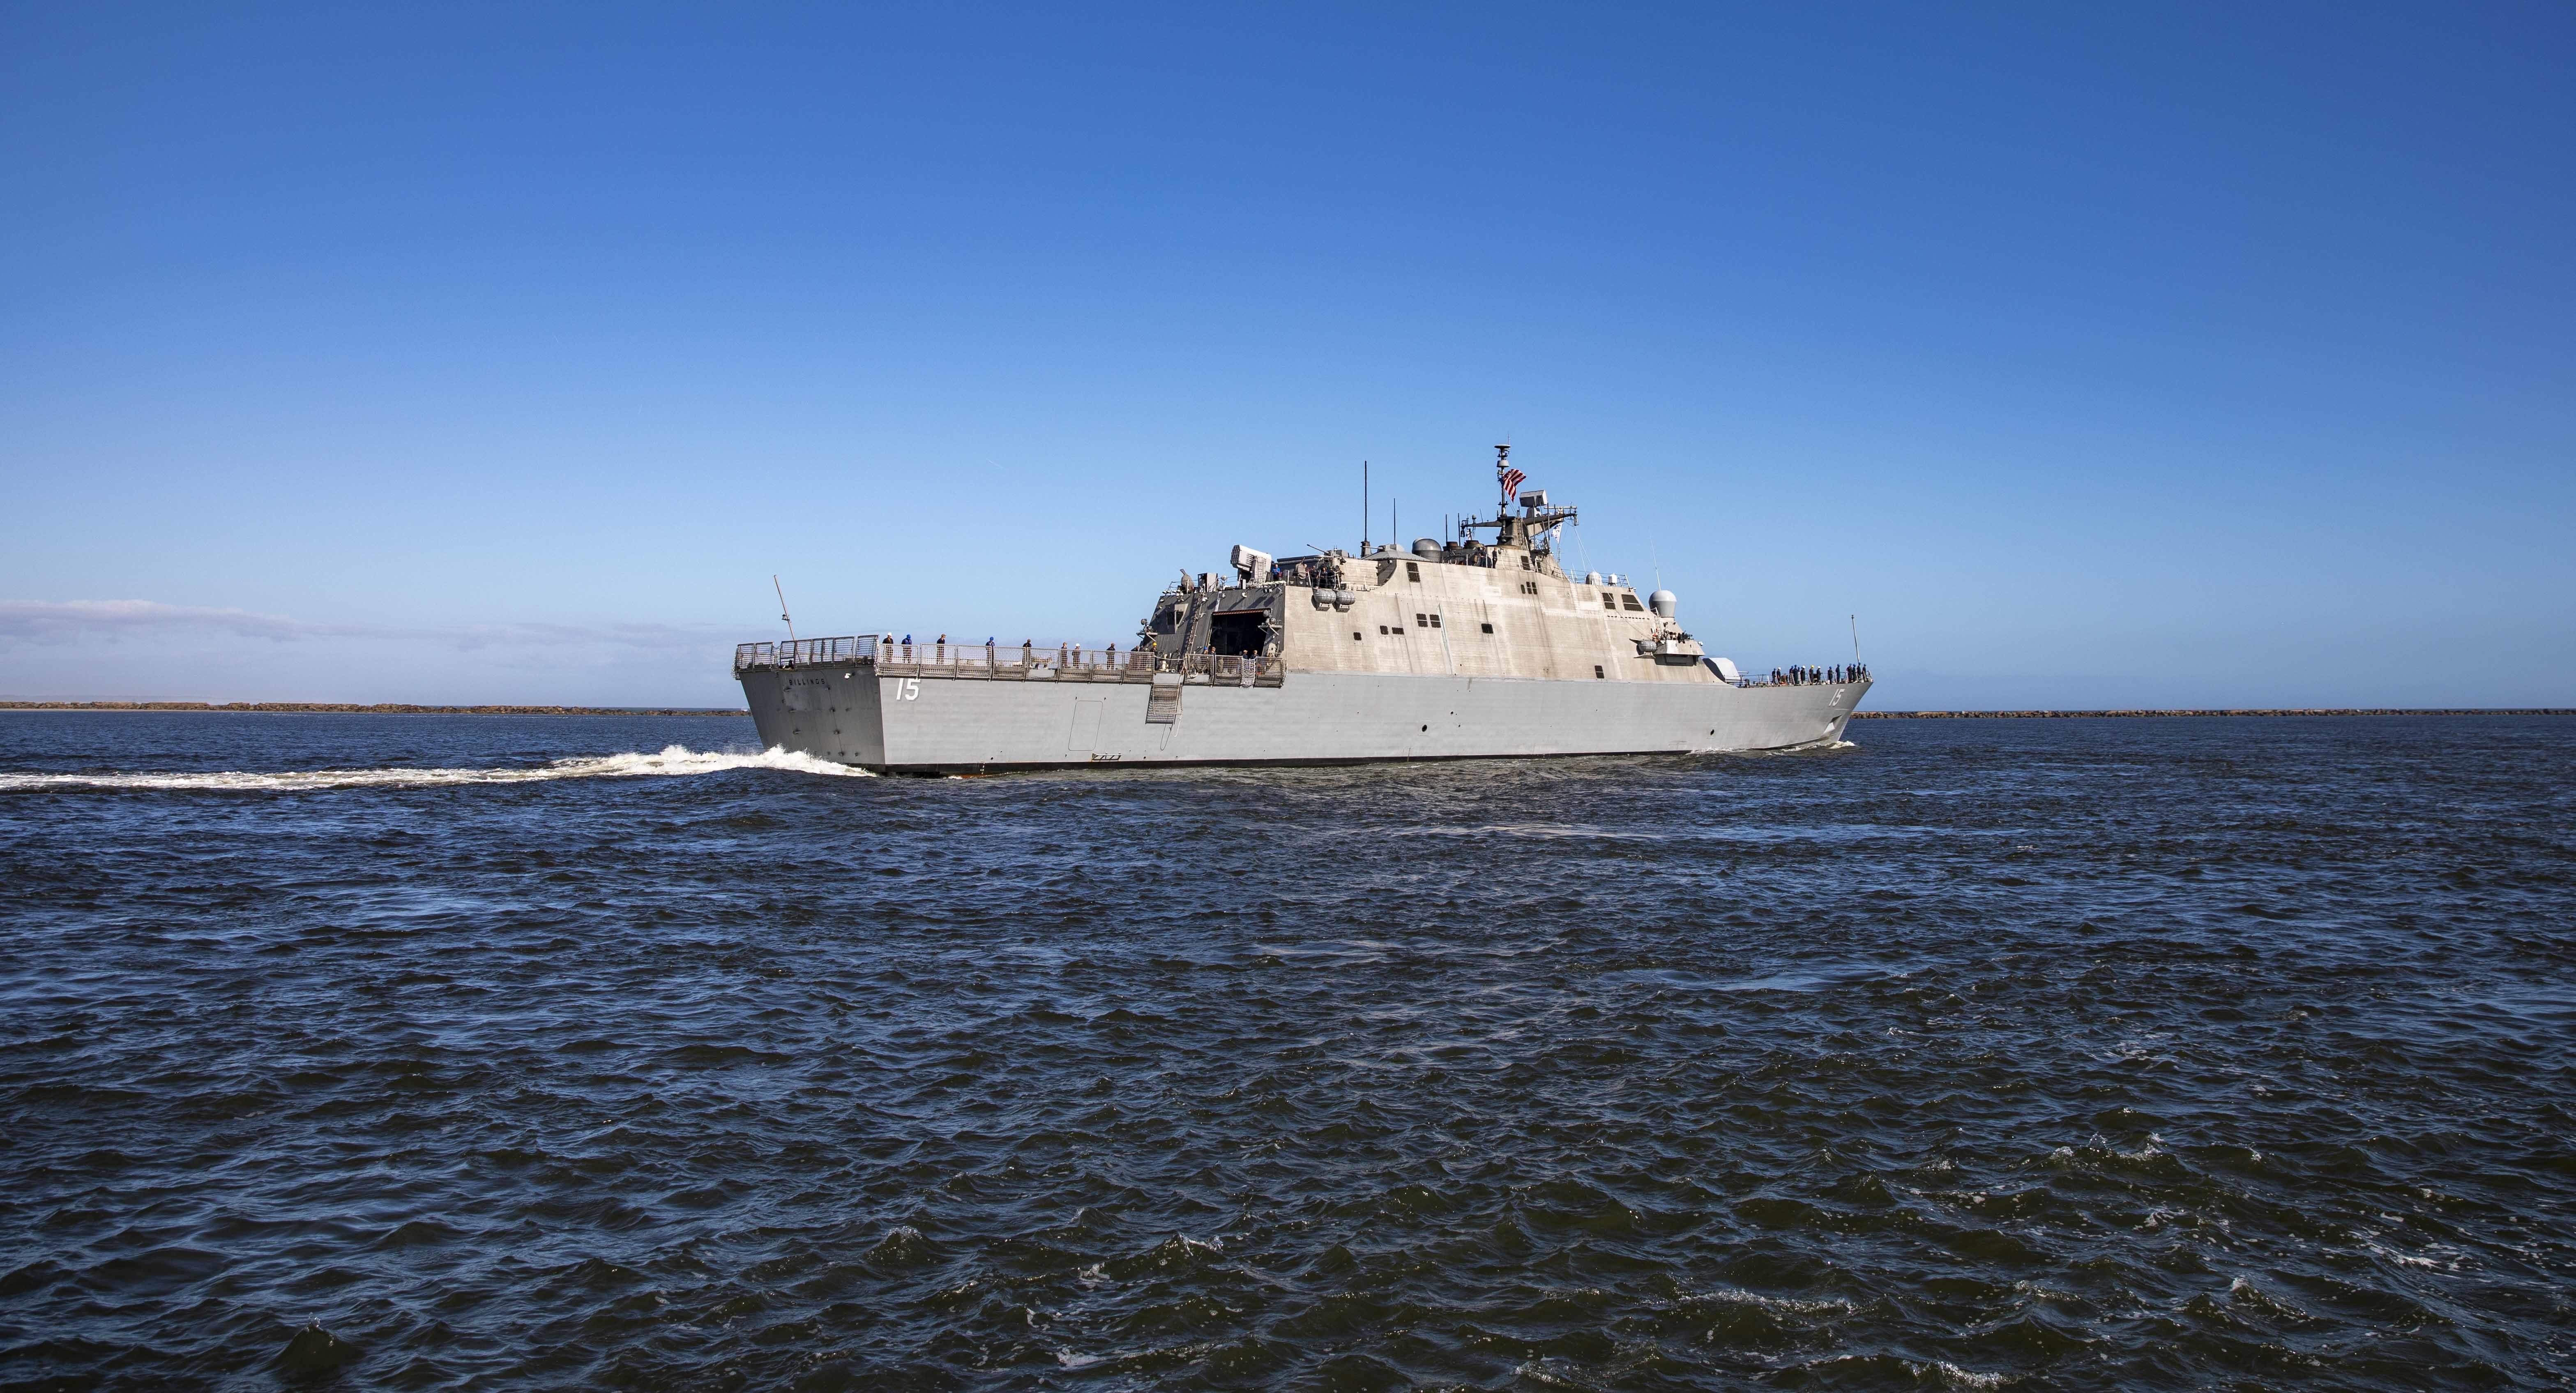 The Freedom-variant littoral combat ship USS Billings (LCS 15) departs Naval Station Mayport, Florida for the ship's second deployment.